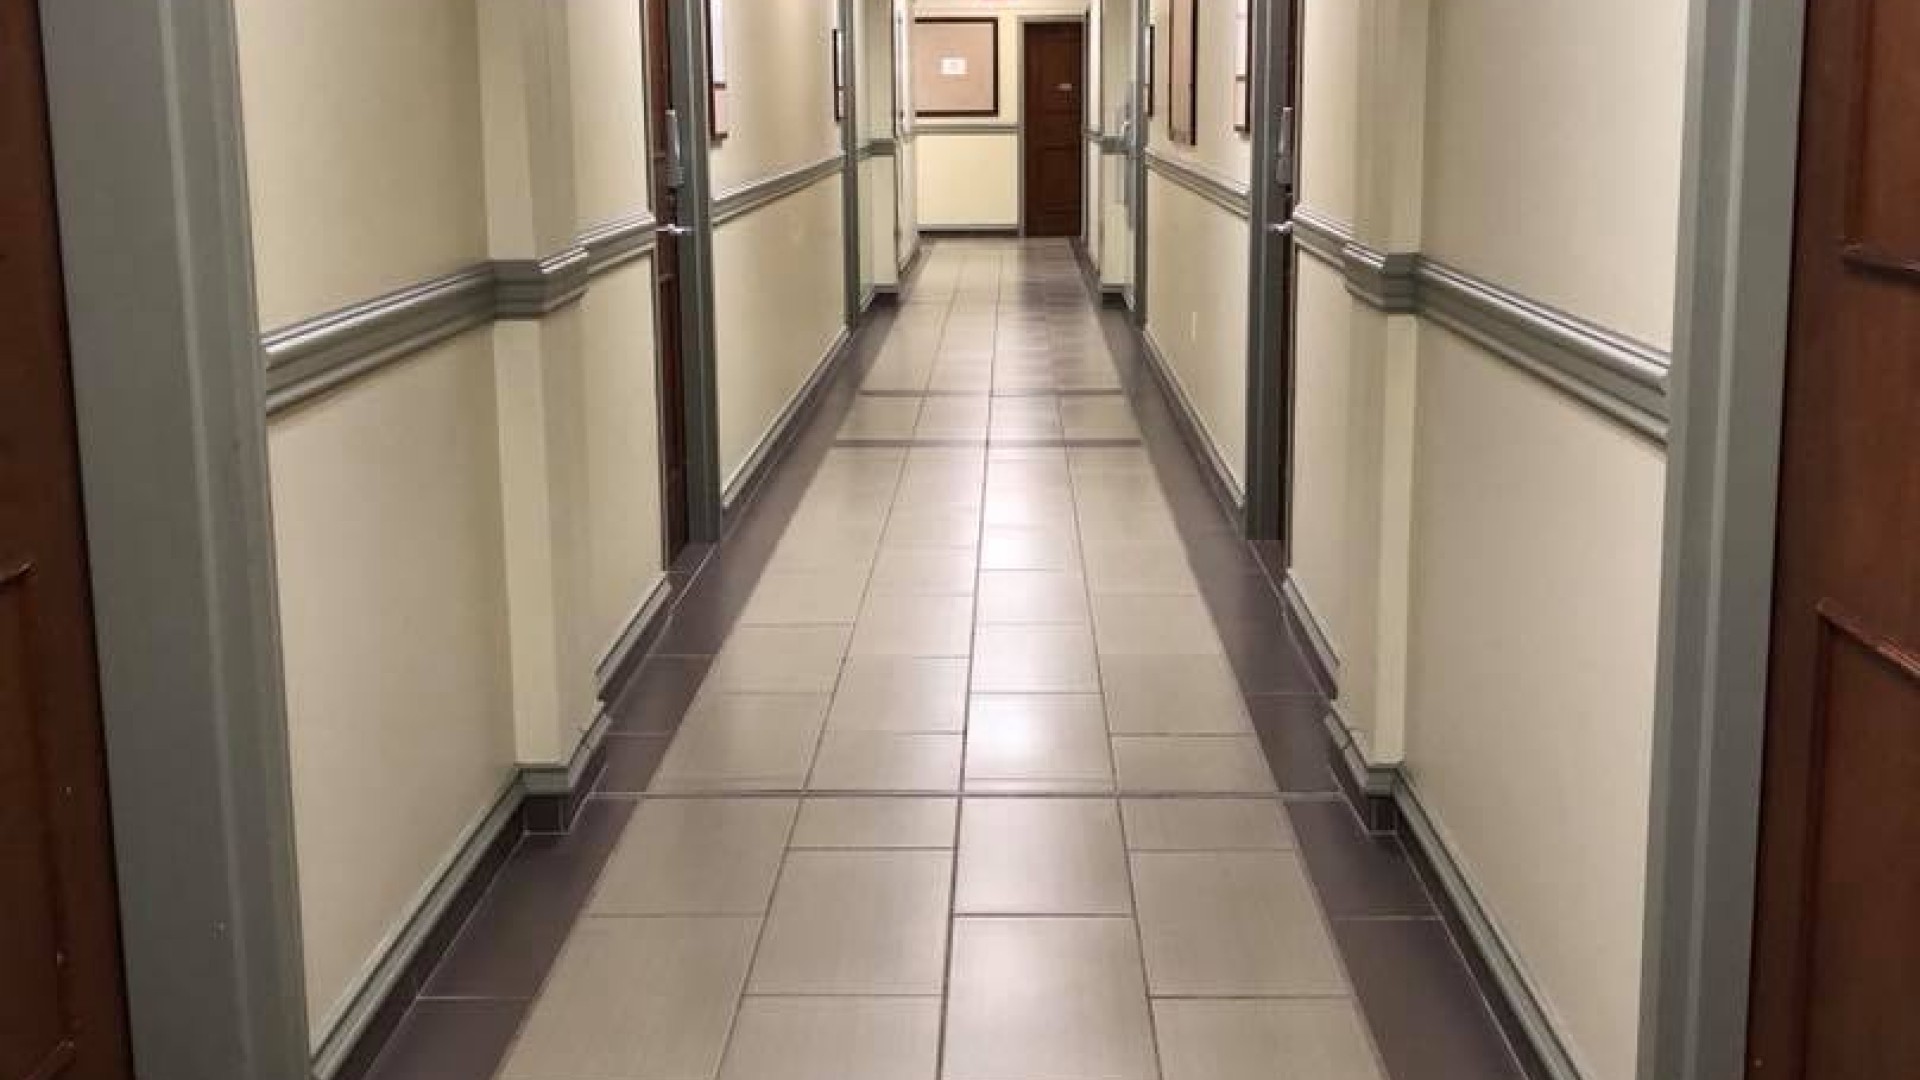 Hallway with dorm rooms along each side 